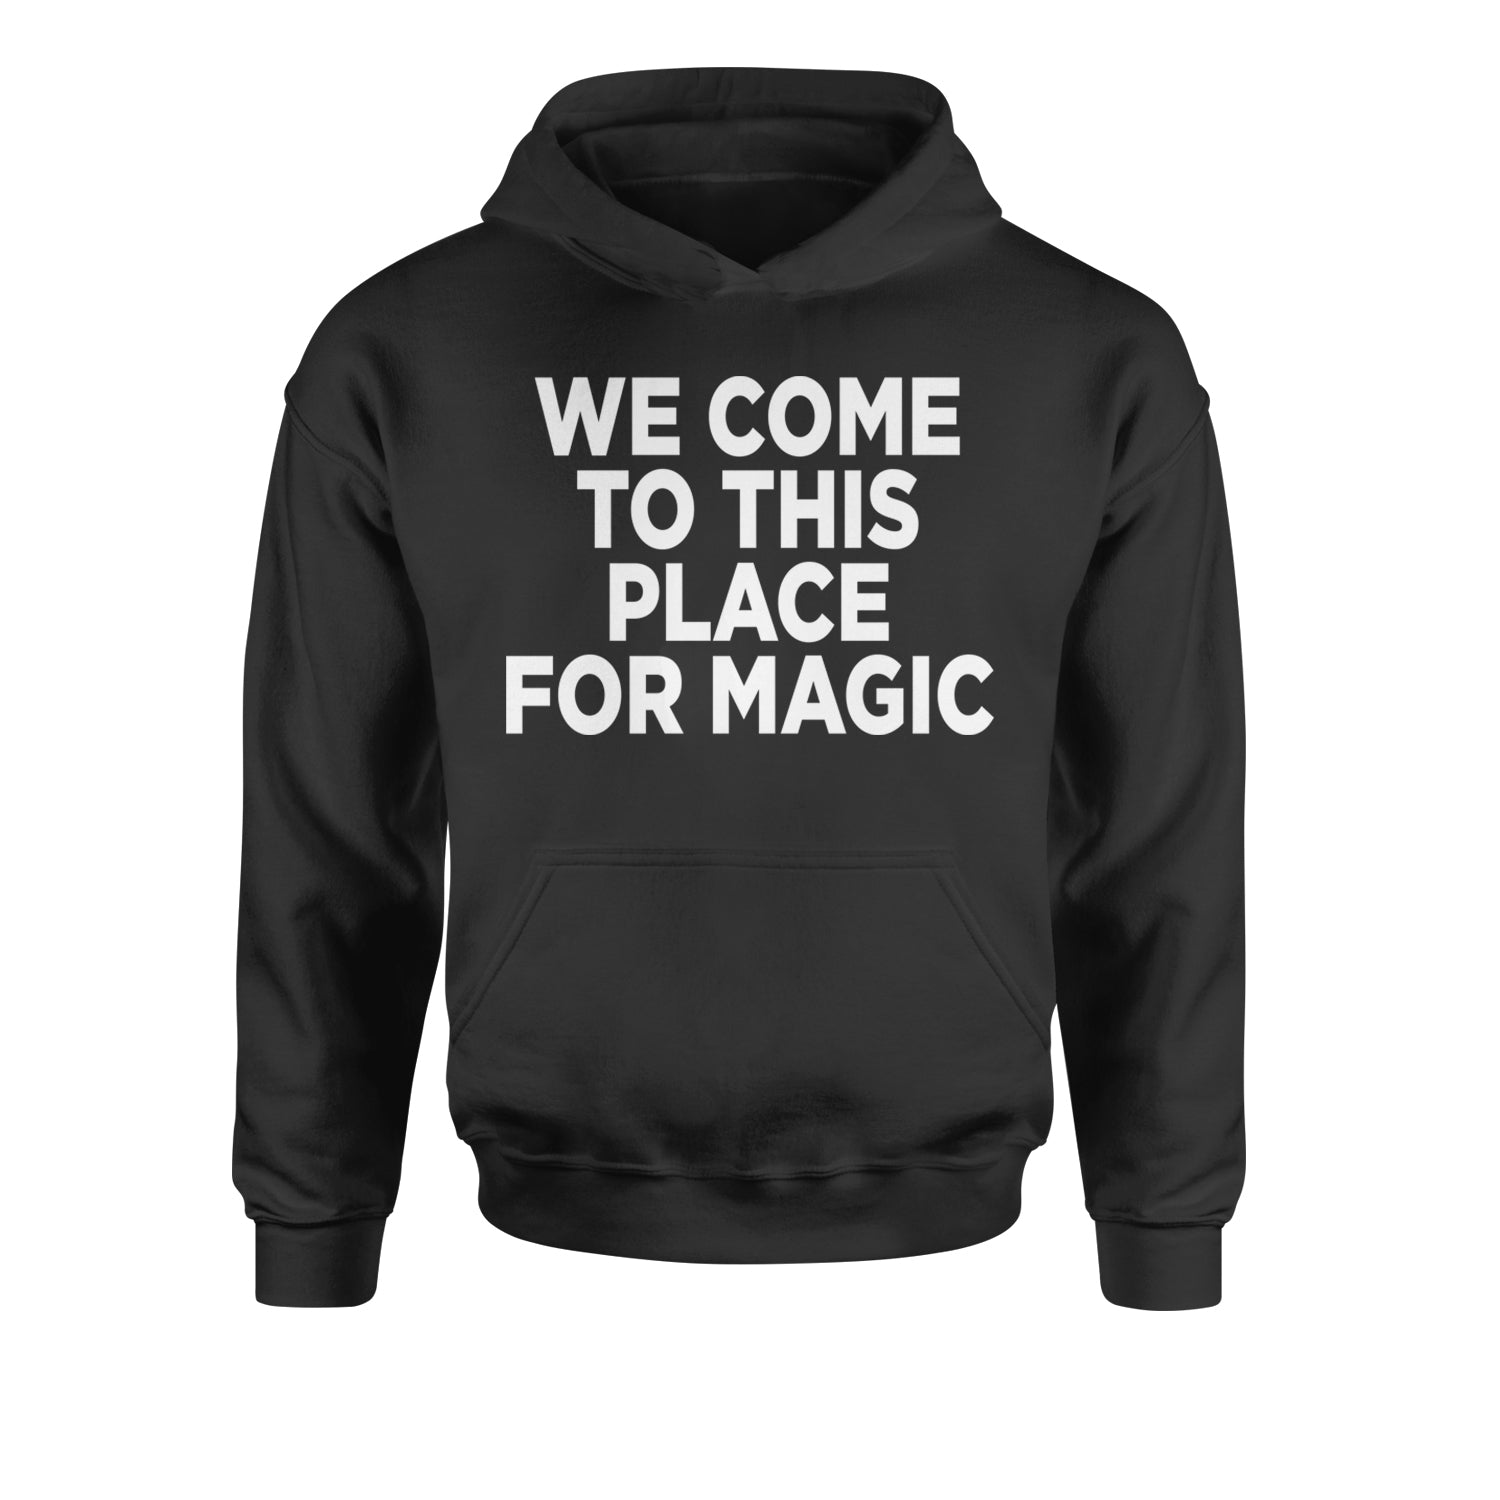 We Come To This Place For Magic Guts Youth-Sized Hoodie